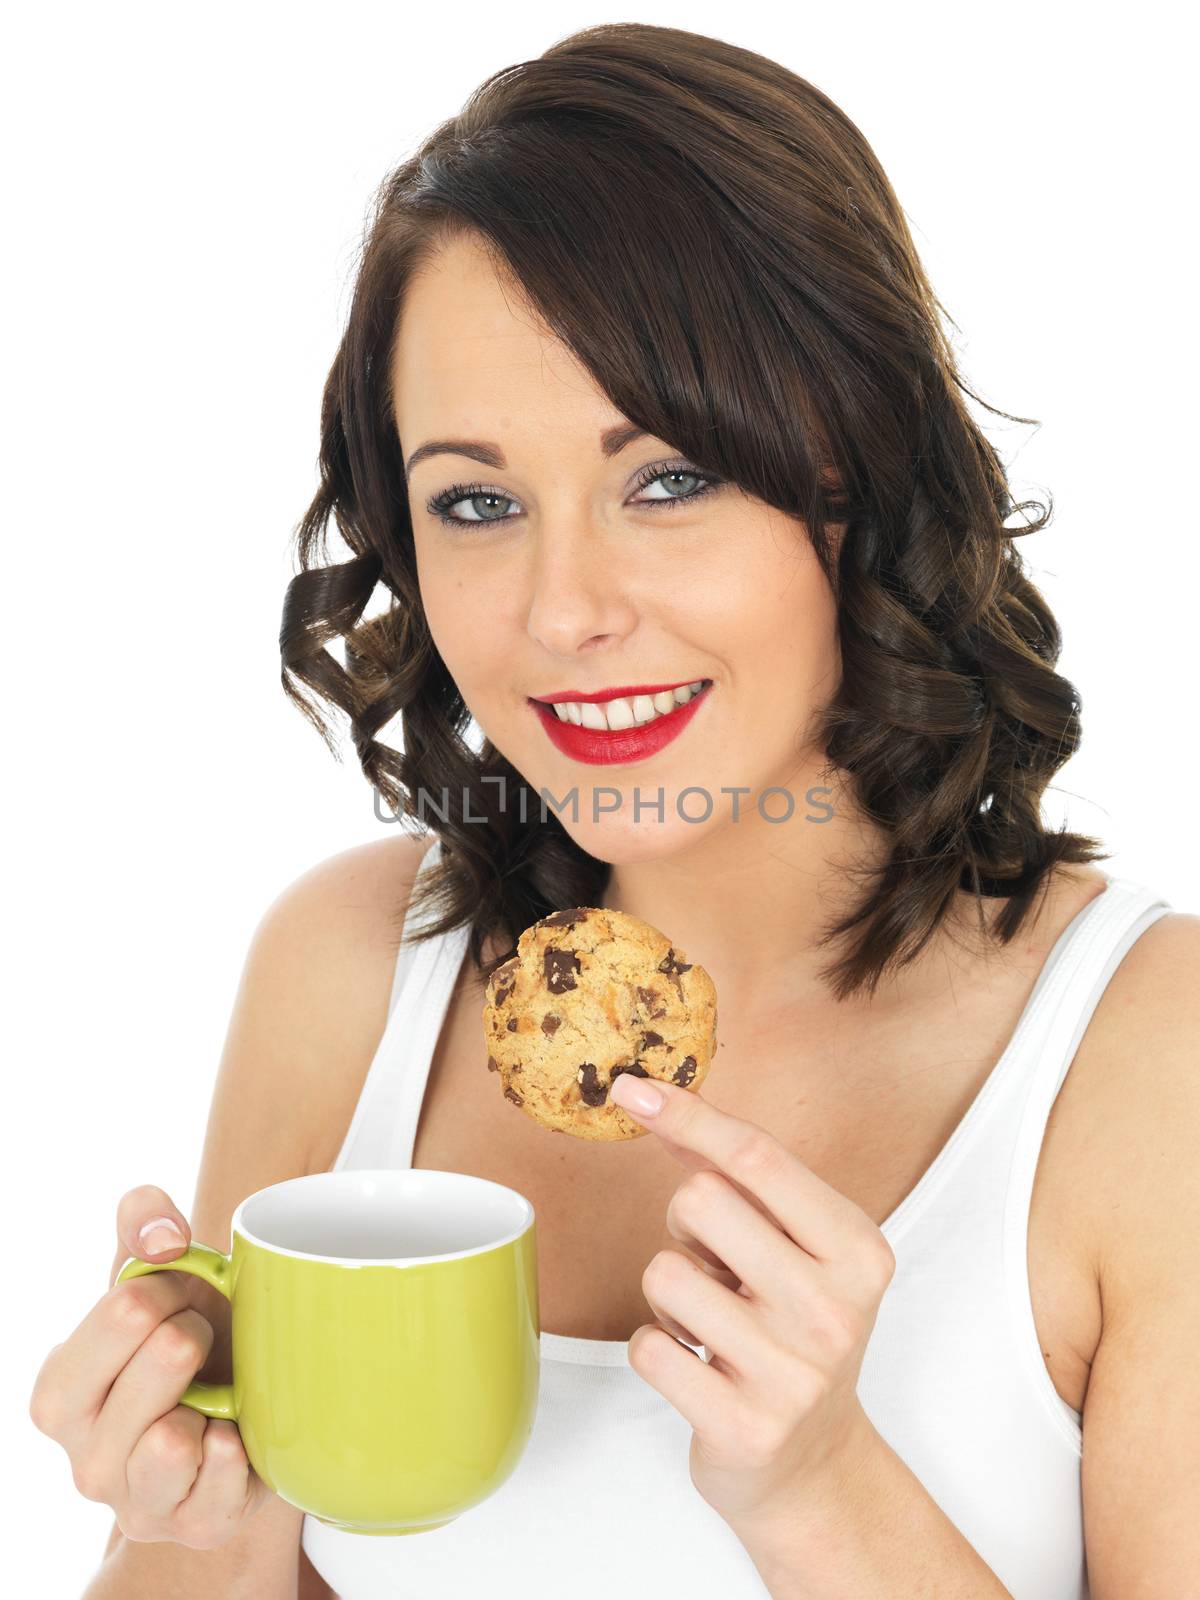 Young Woman with a Mug of Tea and Biscuit by Whiteboxmedia